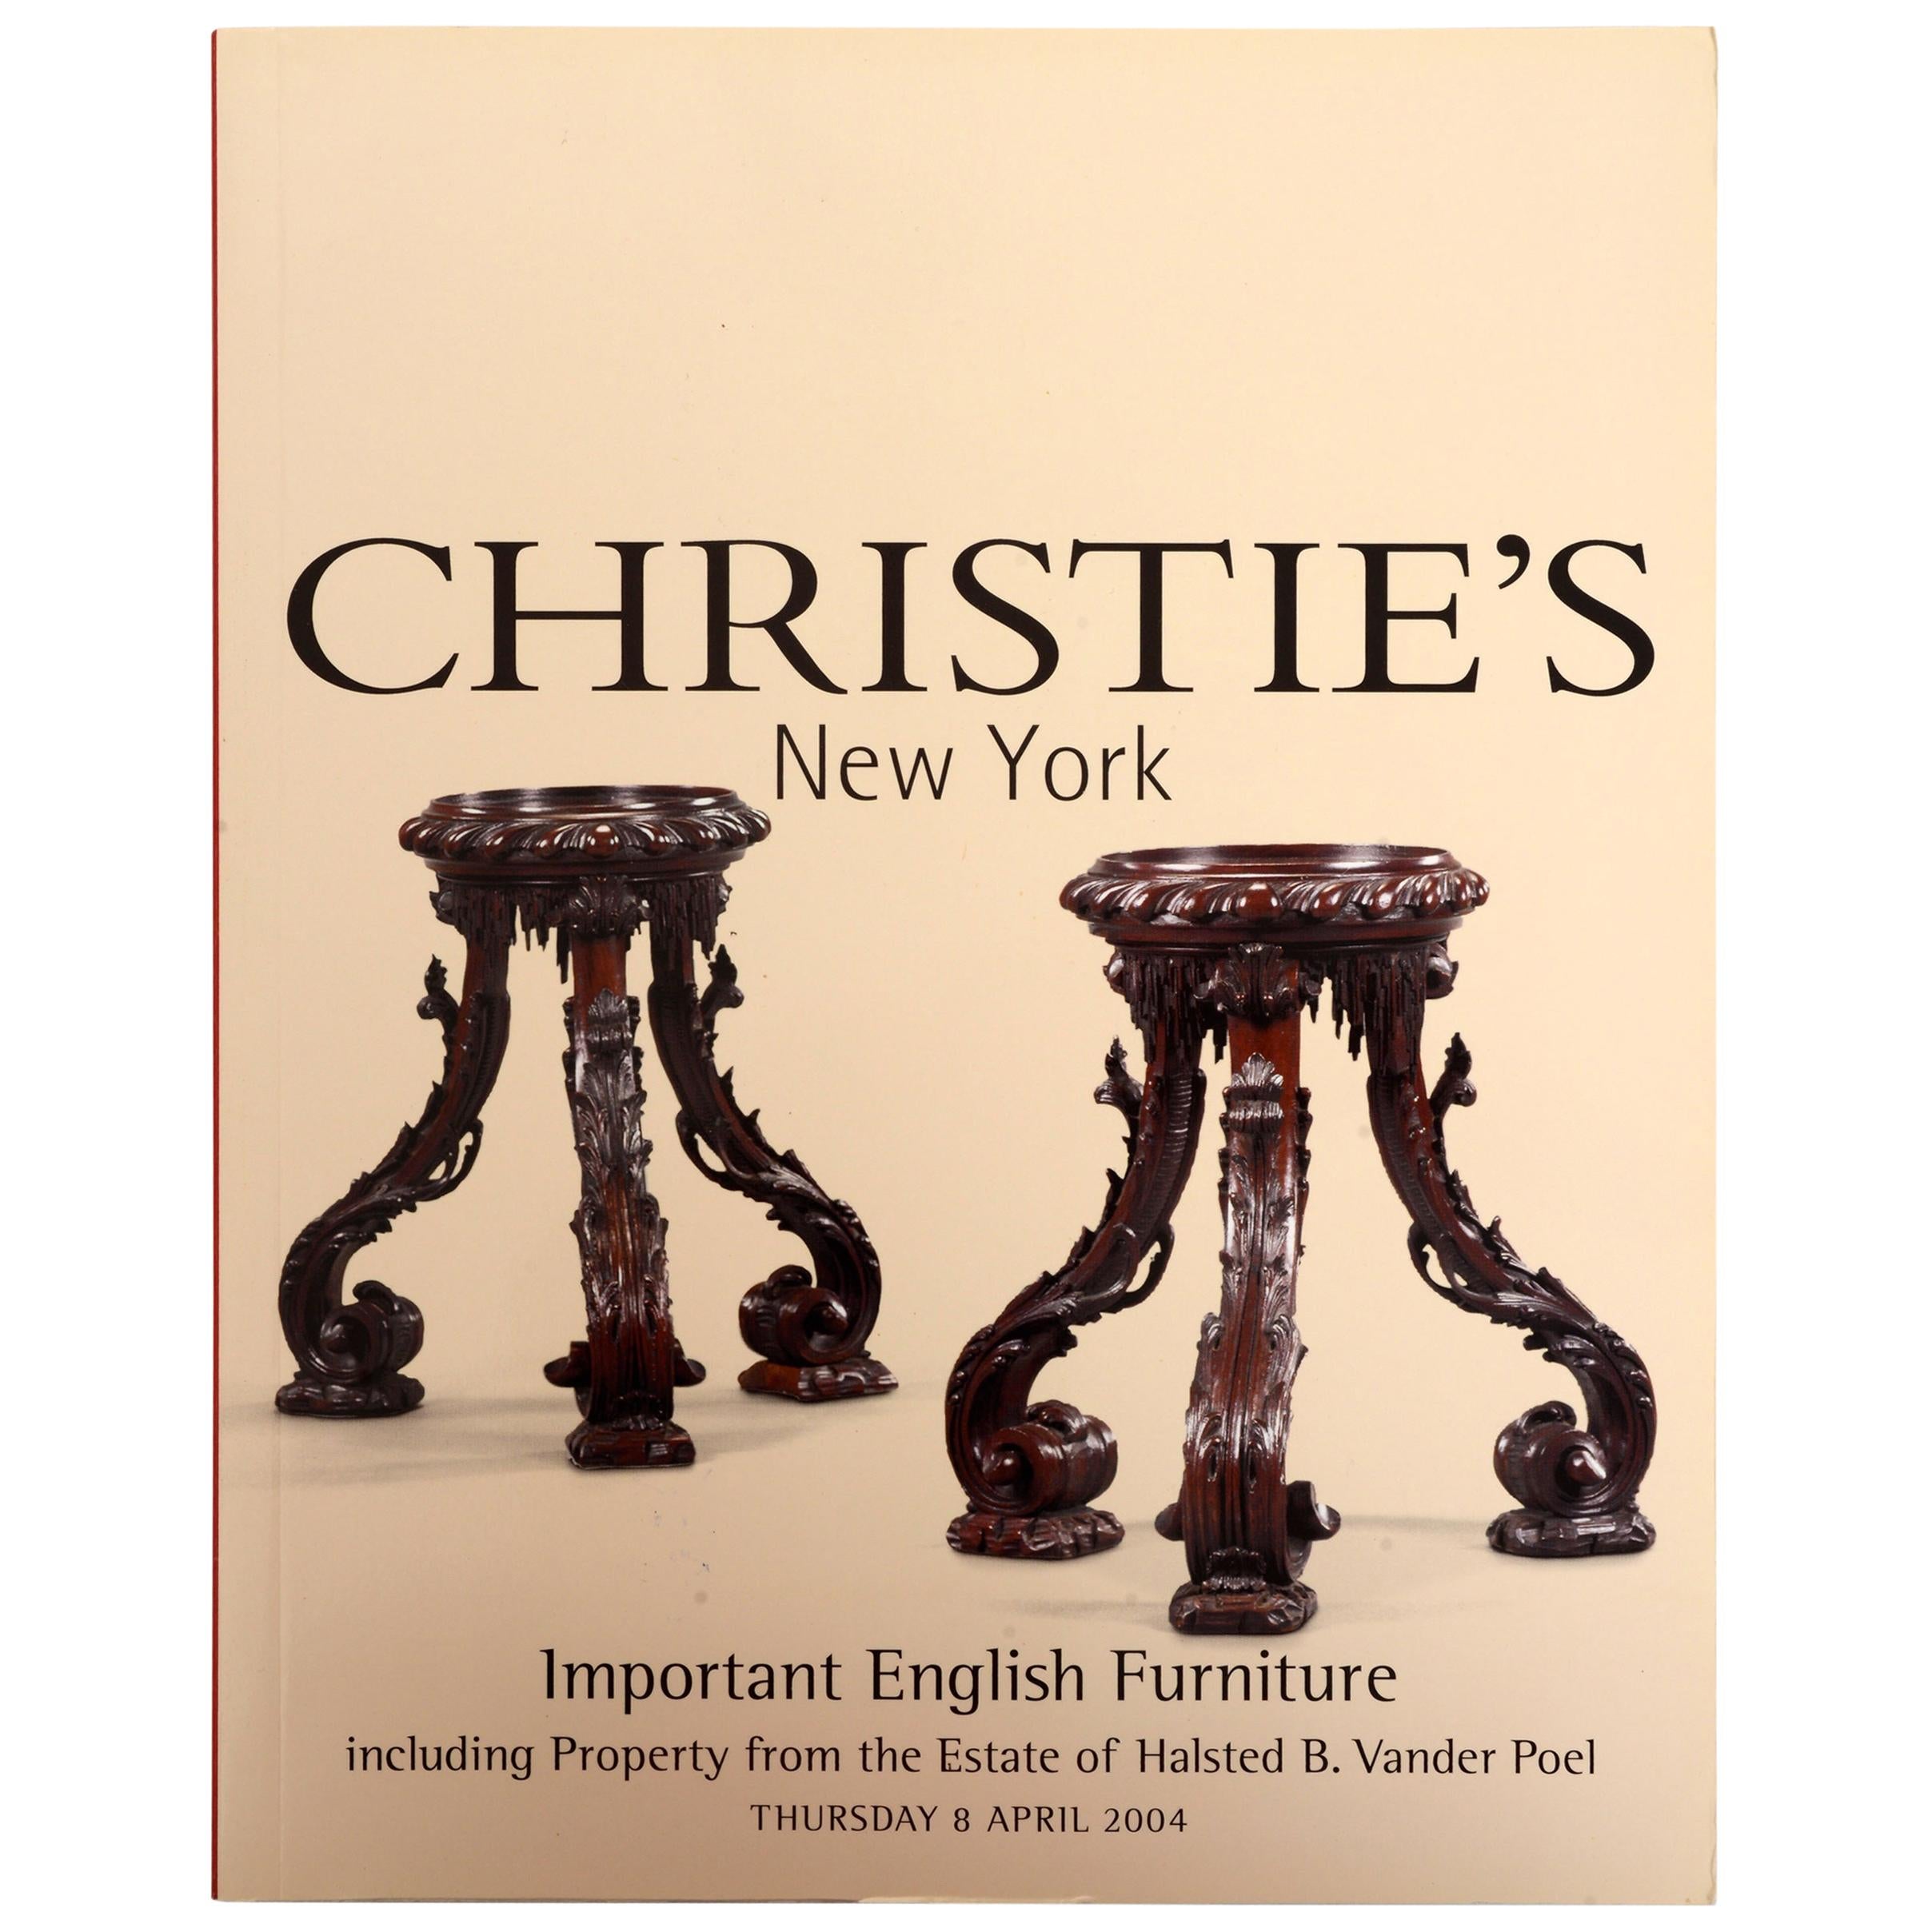 Christie's: Important English Furniture, Property from the Estate of Vander Poel